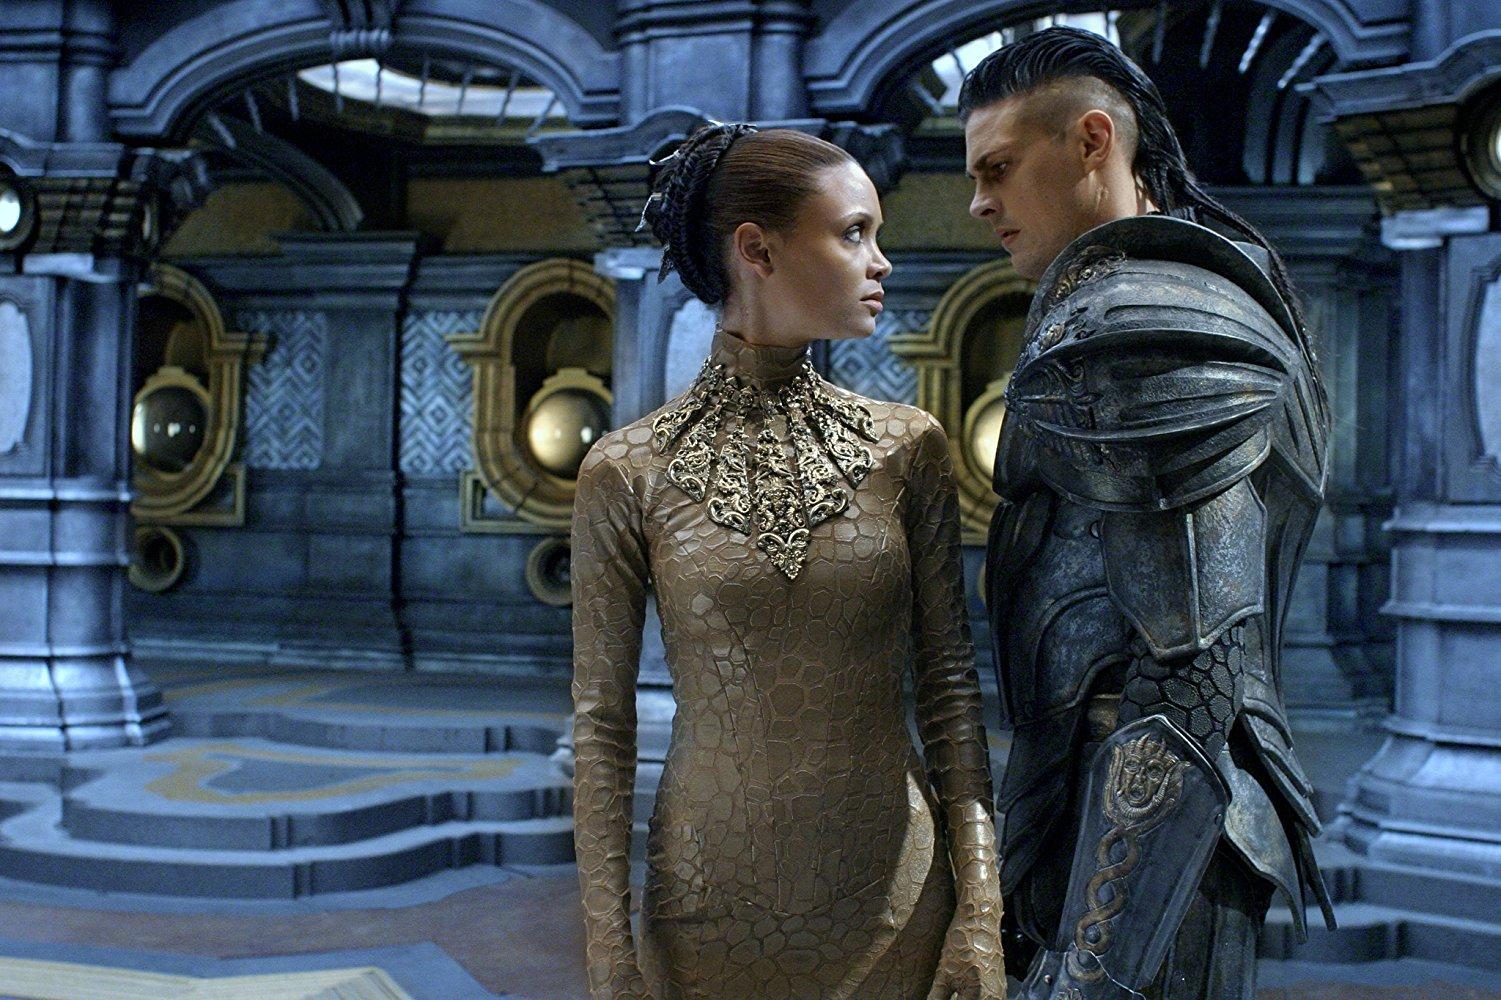 Image gallery for The Chronicles of Riddick.